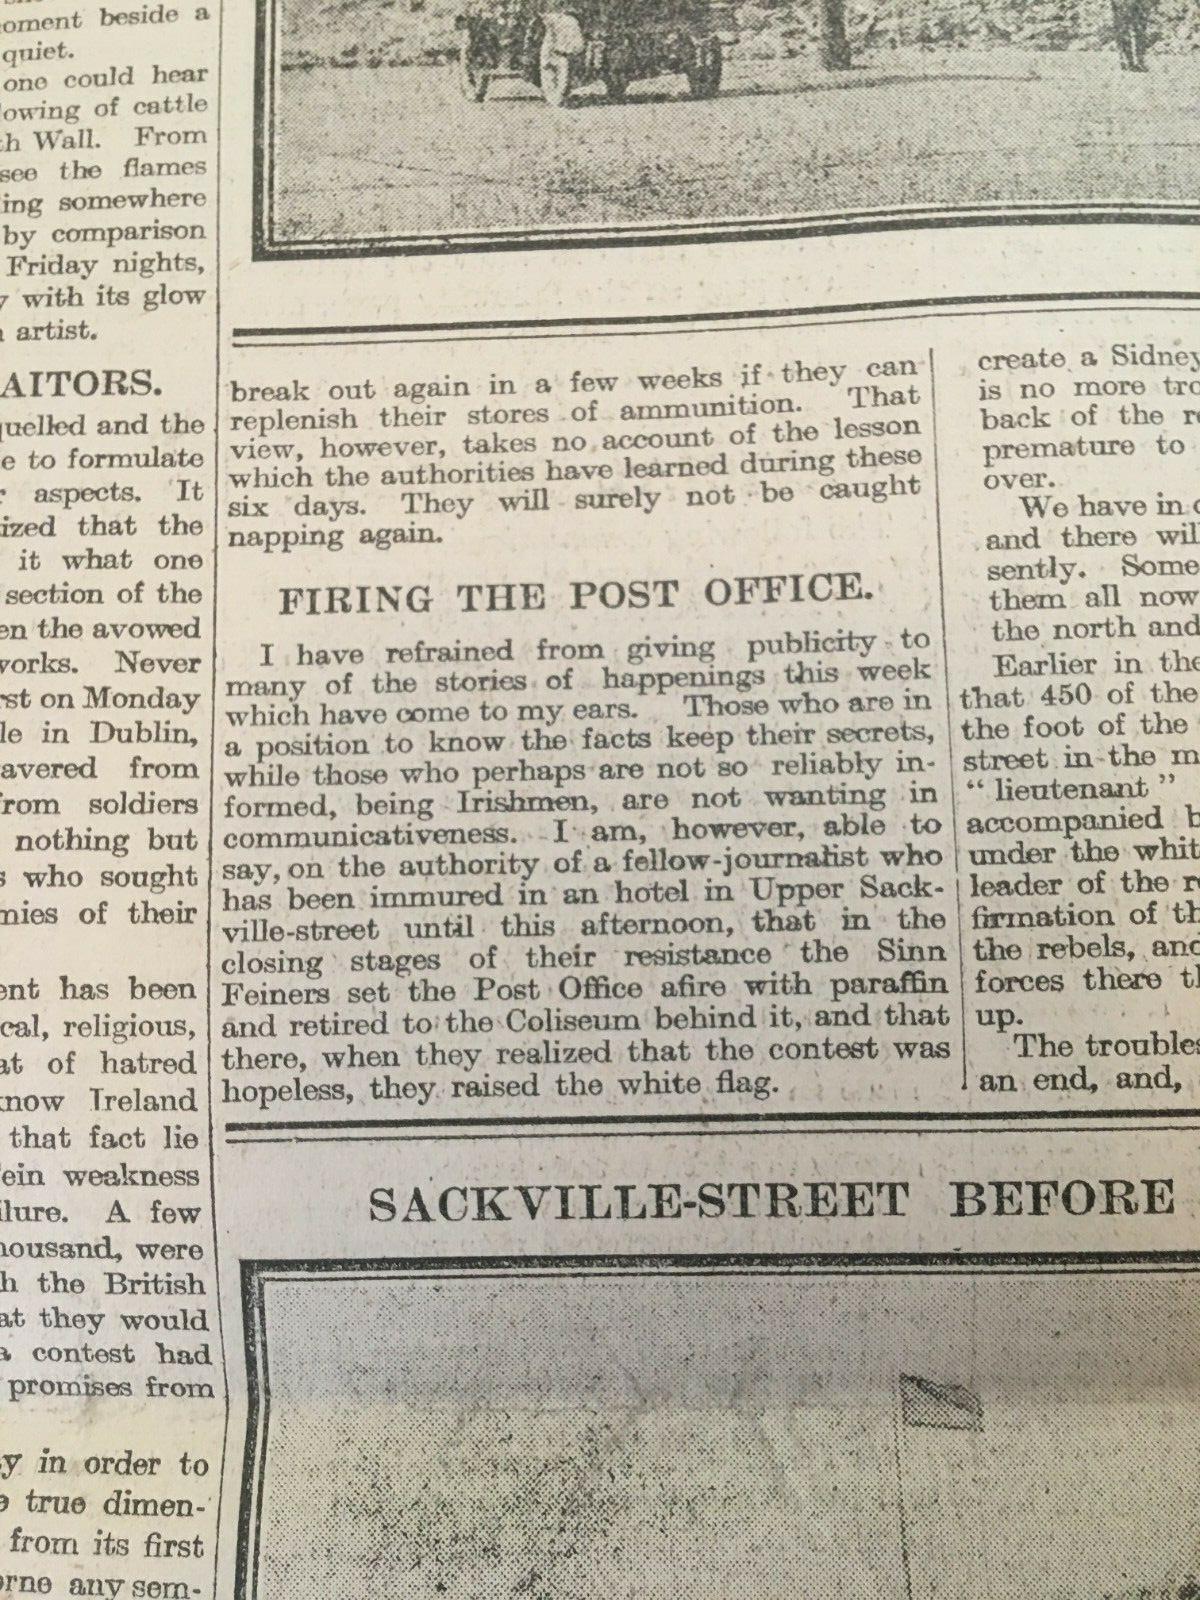 Easter Rising Rebellion 1916 Original Complete Newspaper 2nd May Images & Reports - Image 9 of 12